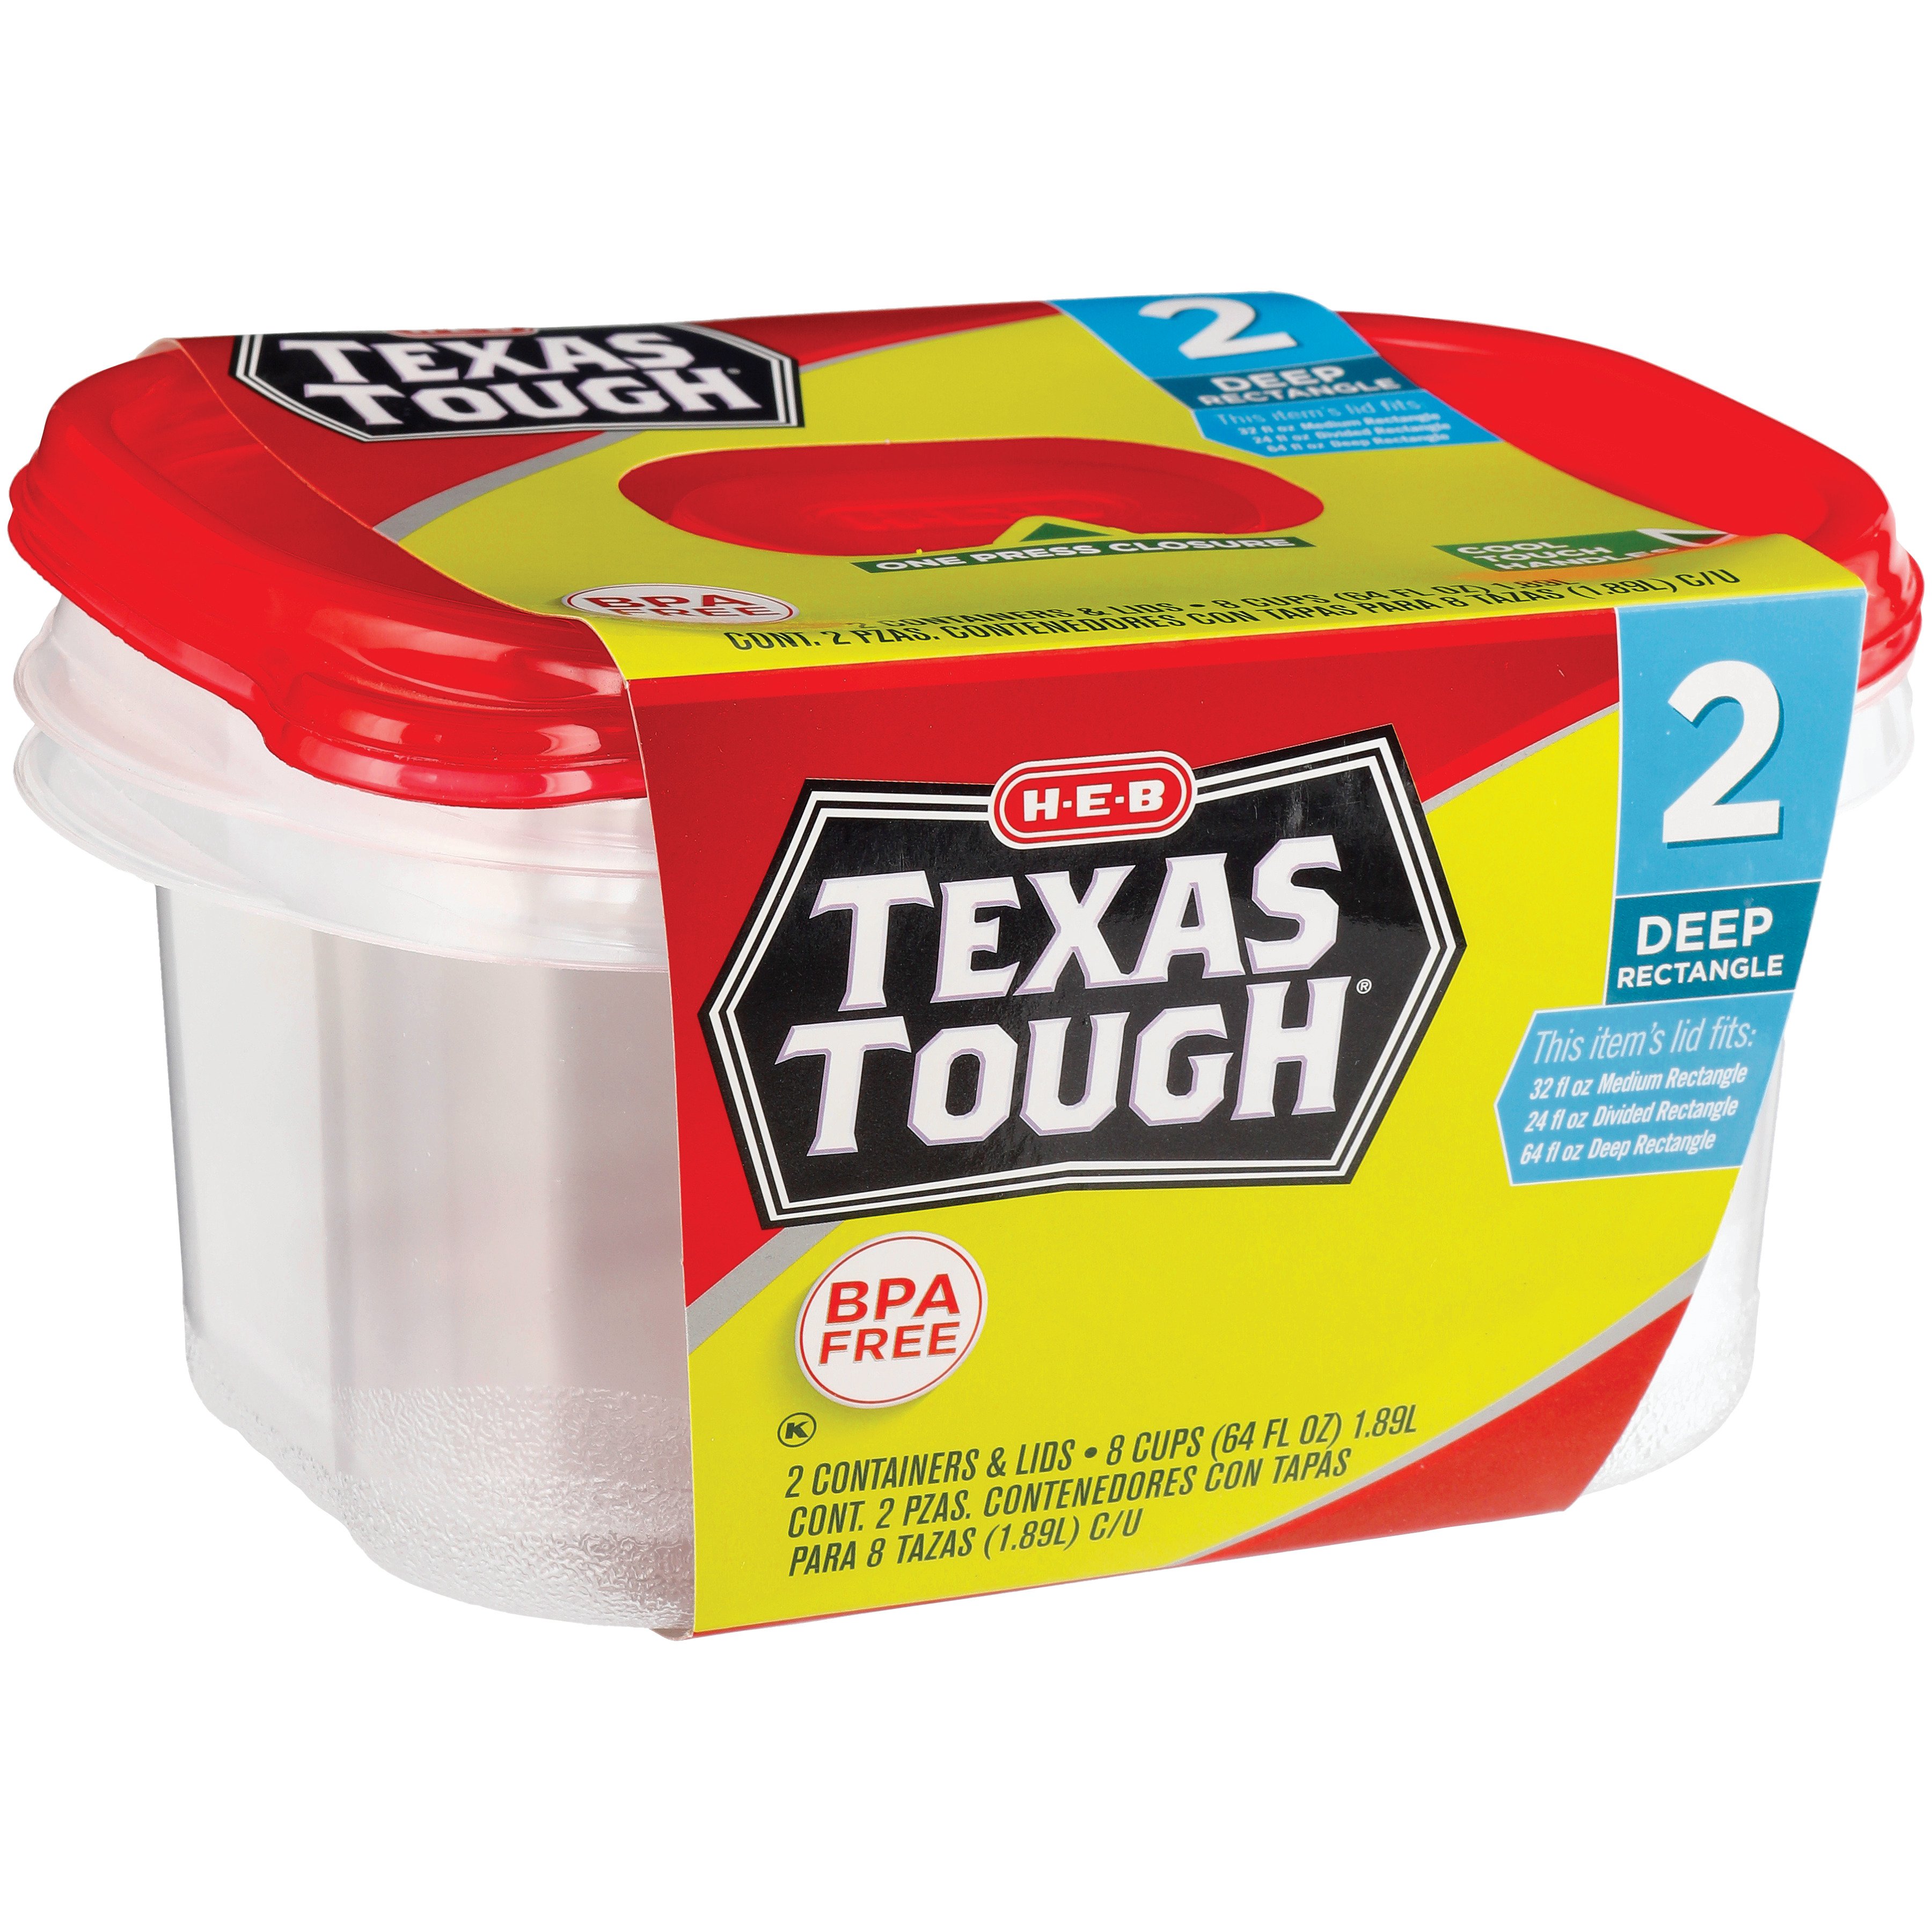 H-E-B Texas Tough Small Rectangle Reusable Containers with Lids